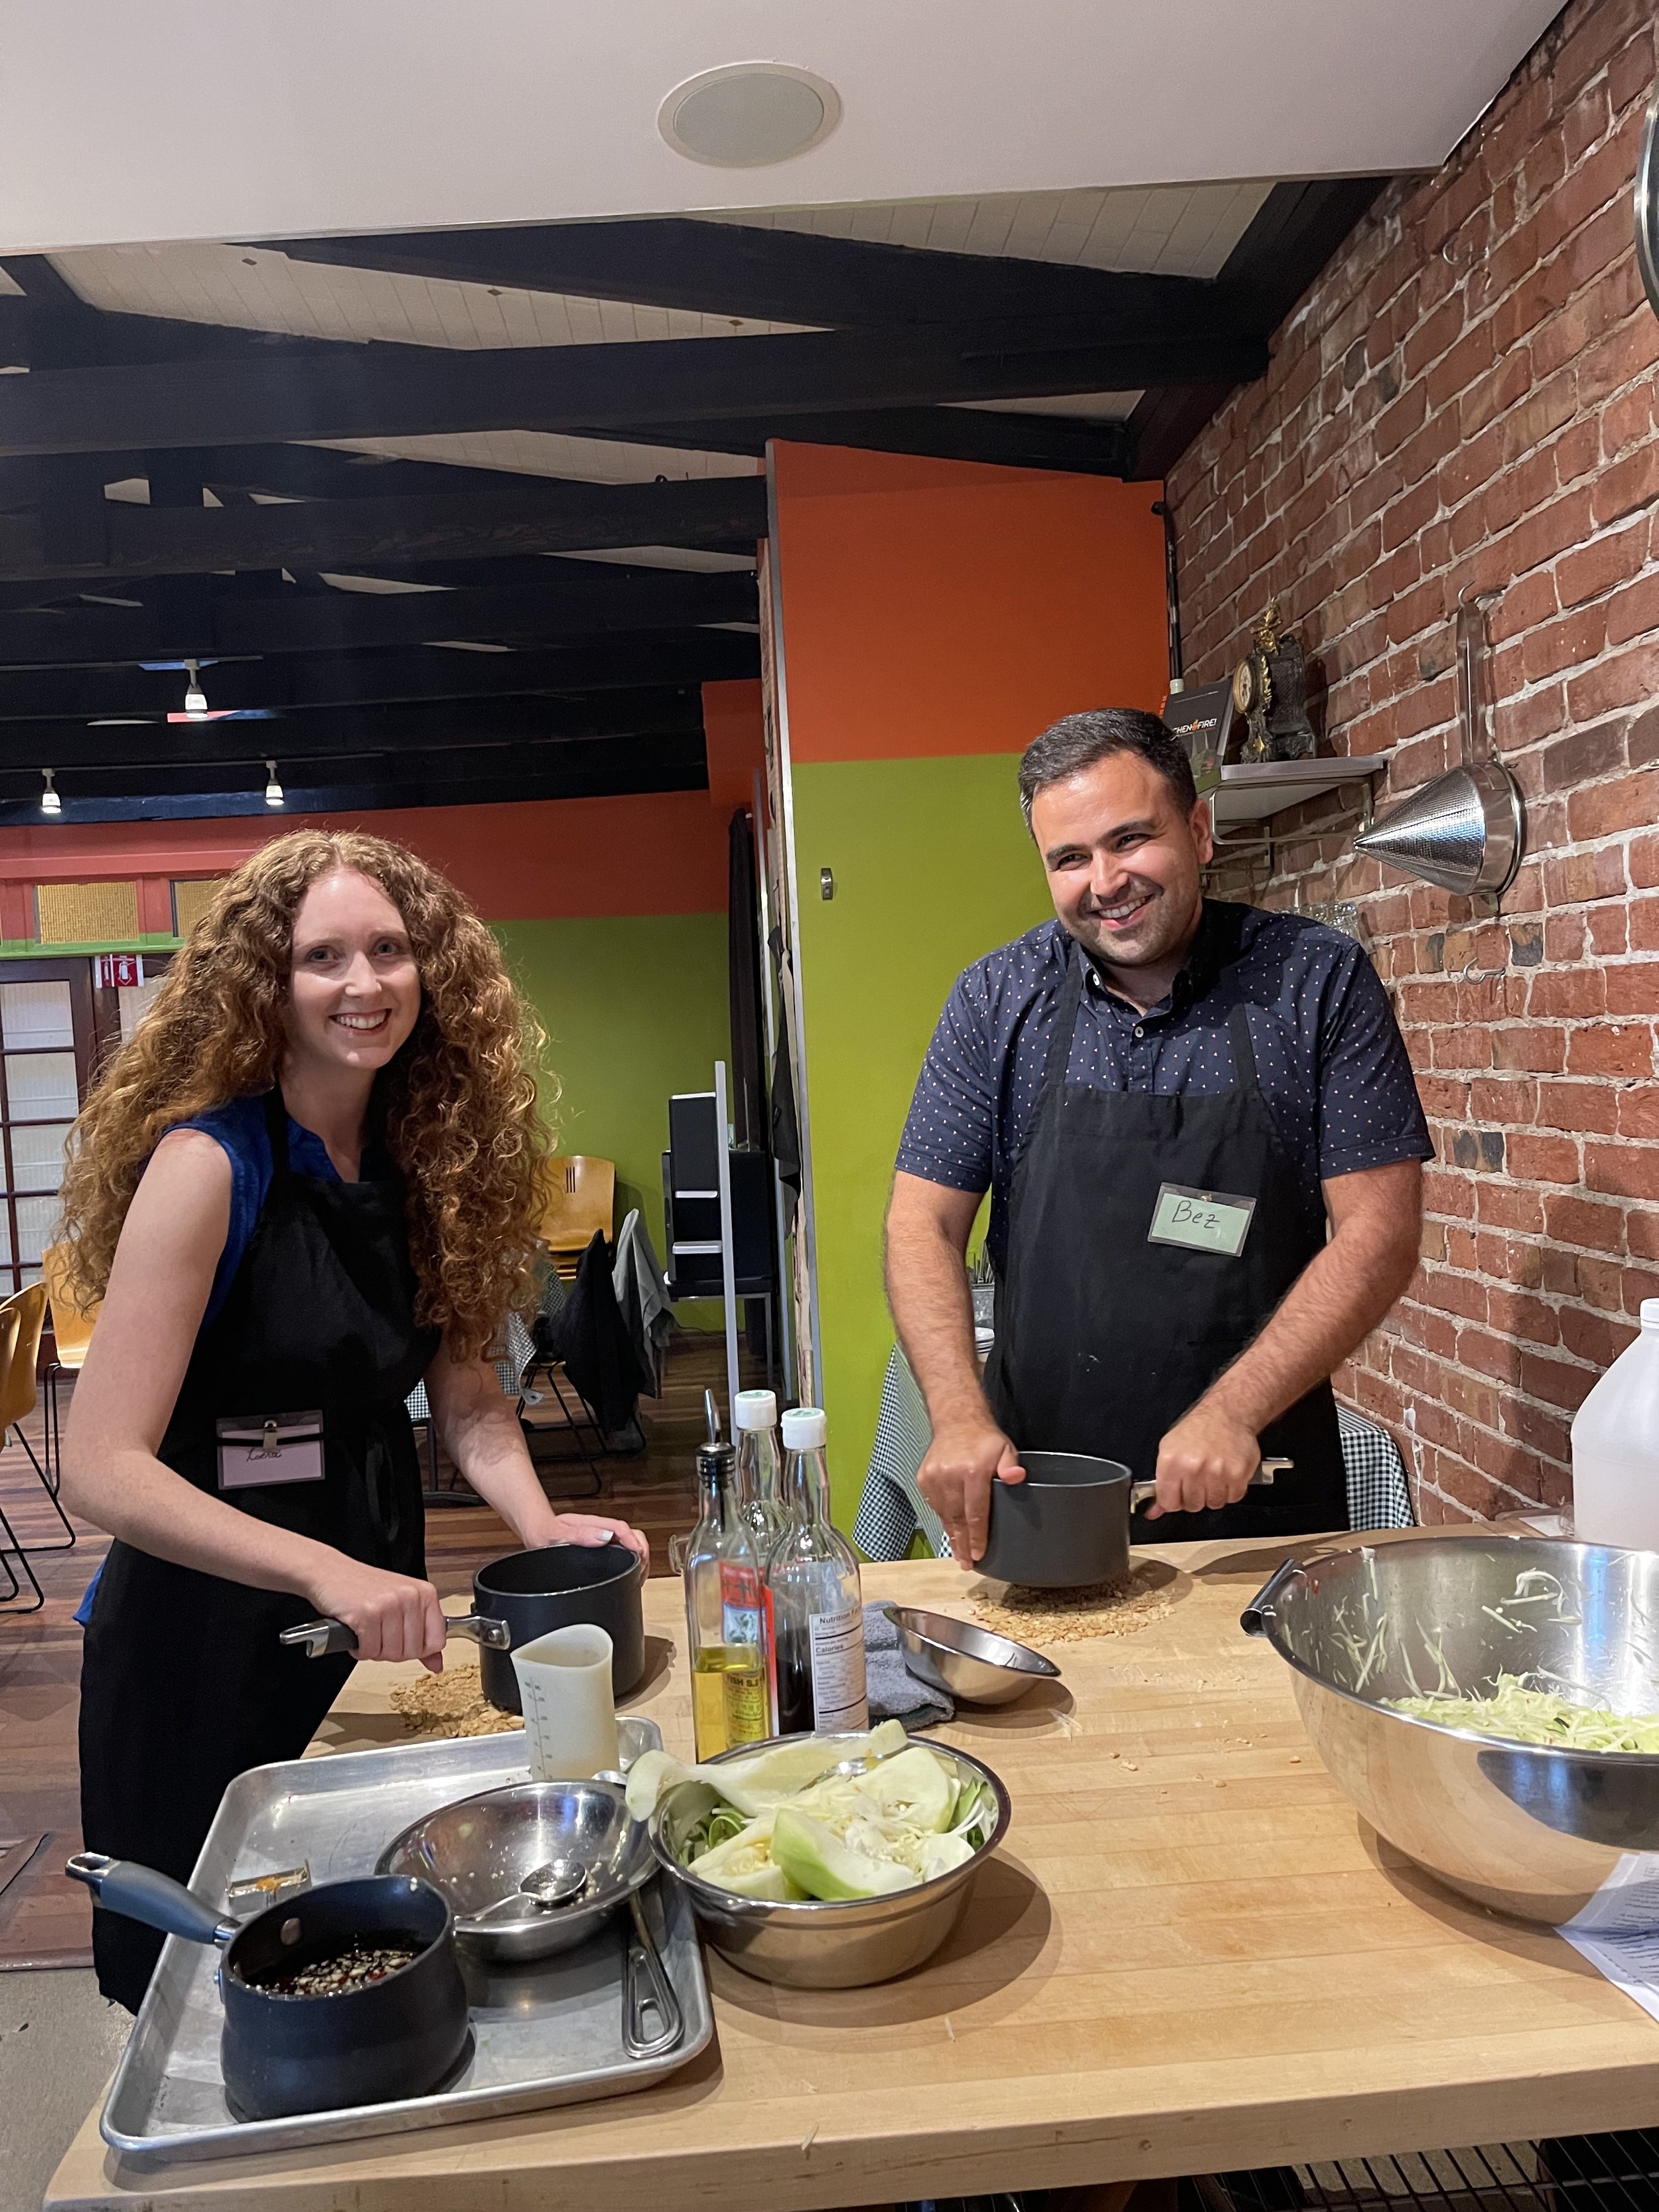 Kitchen on Fire reviews - the best East Bay Cooking Class